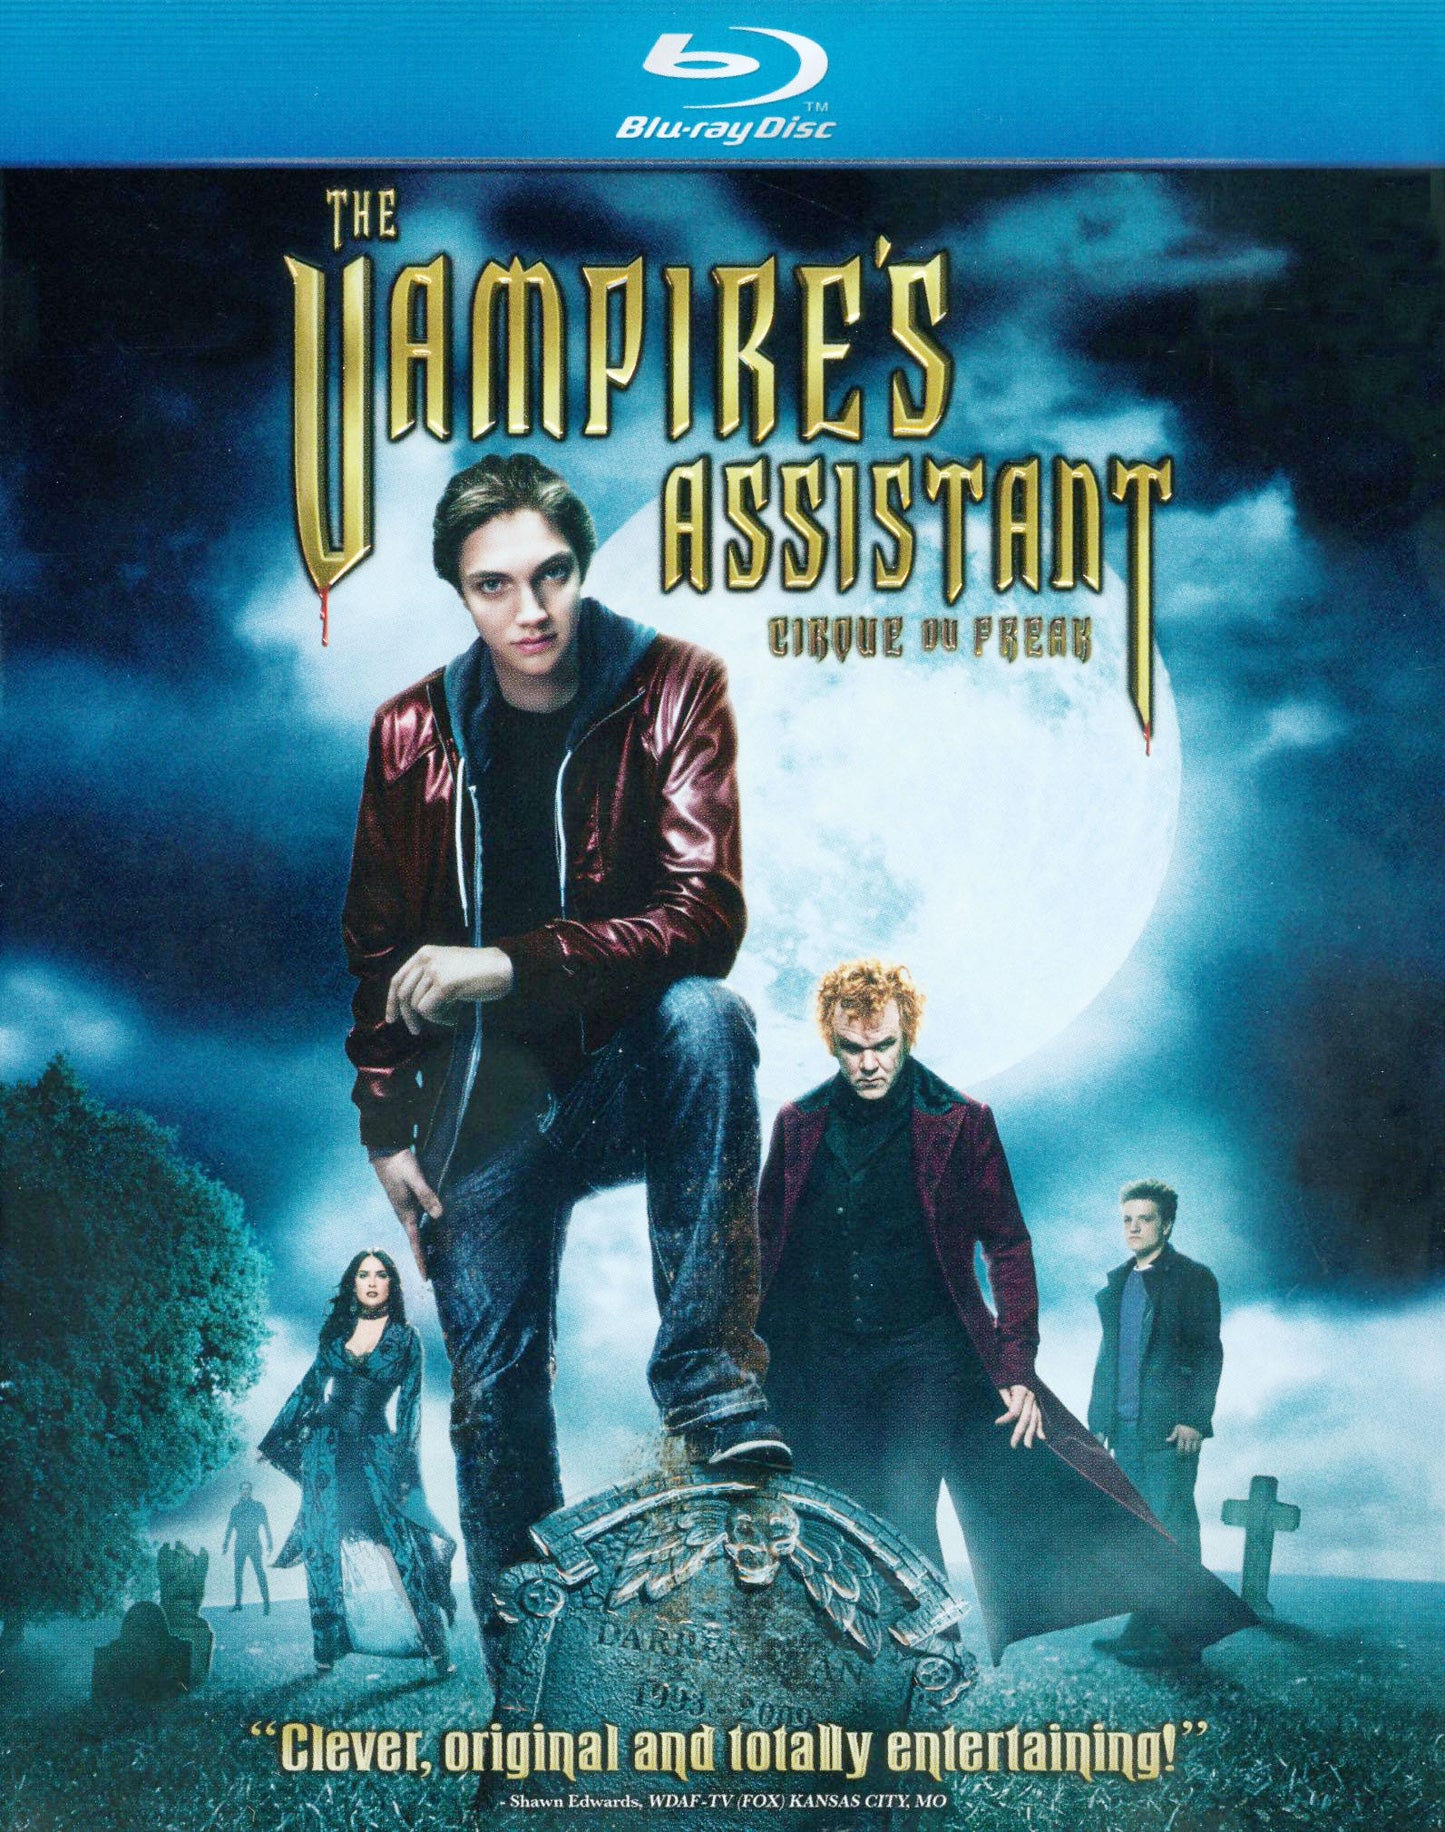 Cirque du Freak: The Vampire's Assistant [Blu-ray] cover art